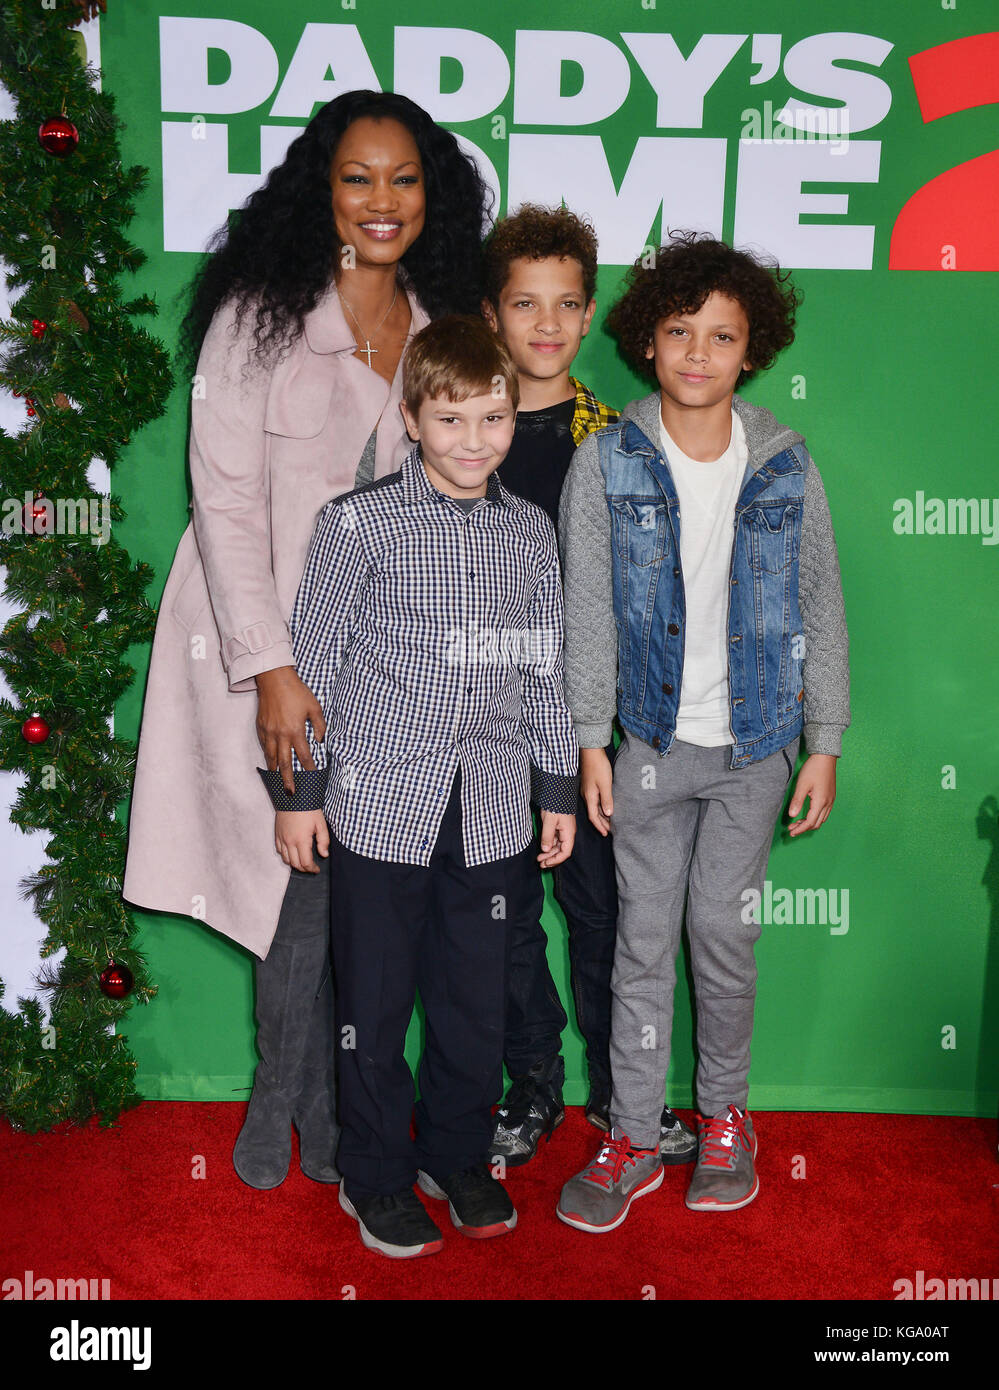 Los Angeles, USA. 05th Nov, 2017. Garcelle Beauvais, Jaid Thomas Nilon, Jax Joseph Nilon and Oliver Saunders 097 attend the premiere of Paramount Pictures' 'Daddy's Home 2' at Regency Village Theatre on November 5, 2017 in Westwood, California. Credit: Tsuni/USA/Alamy Live News Stock Photo